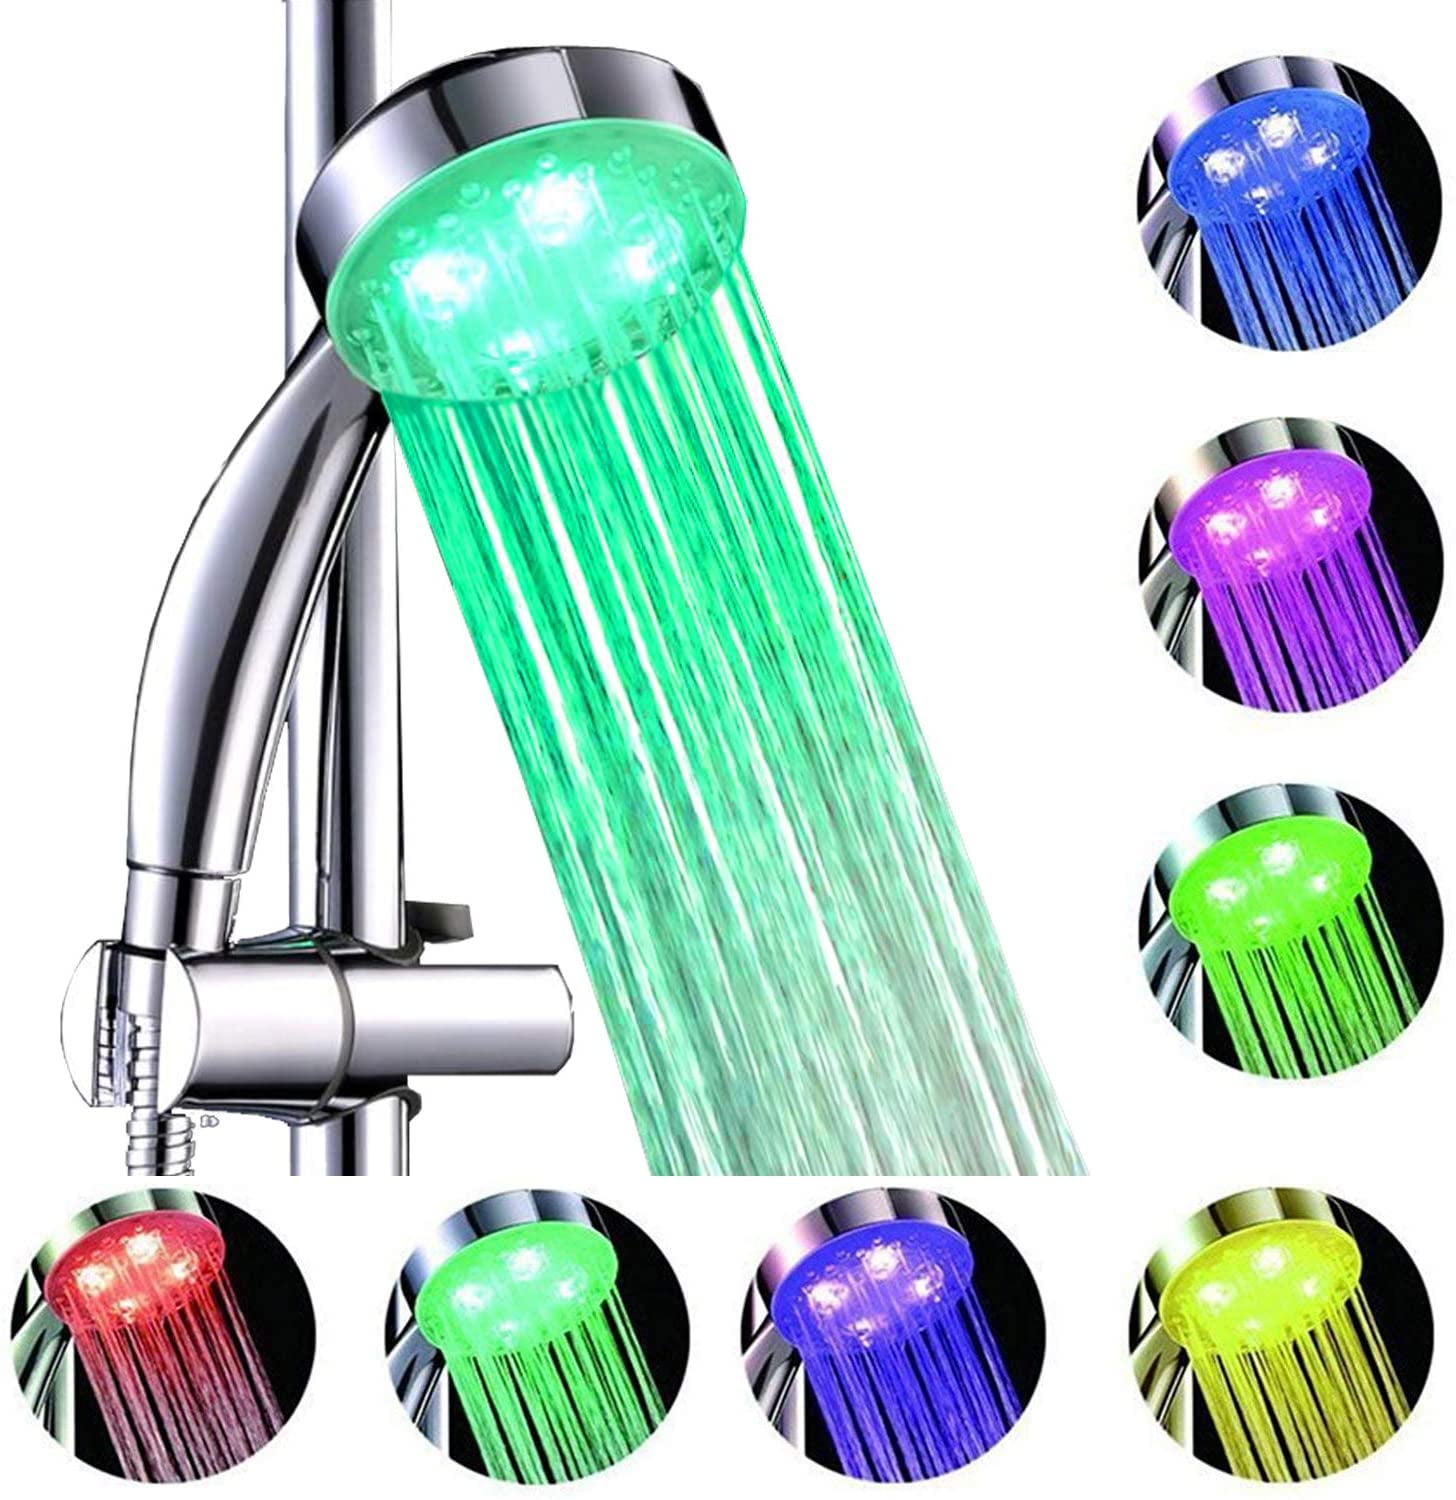 7Color LED Changing Light Bright Water Bath Home Bathroom Shower Head Glow NEW 